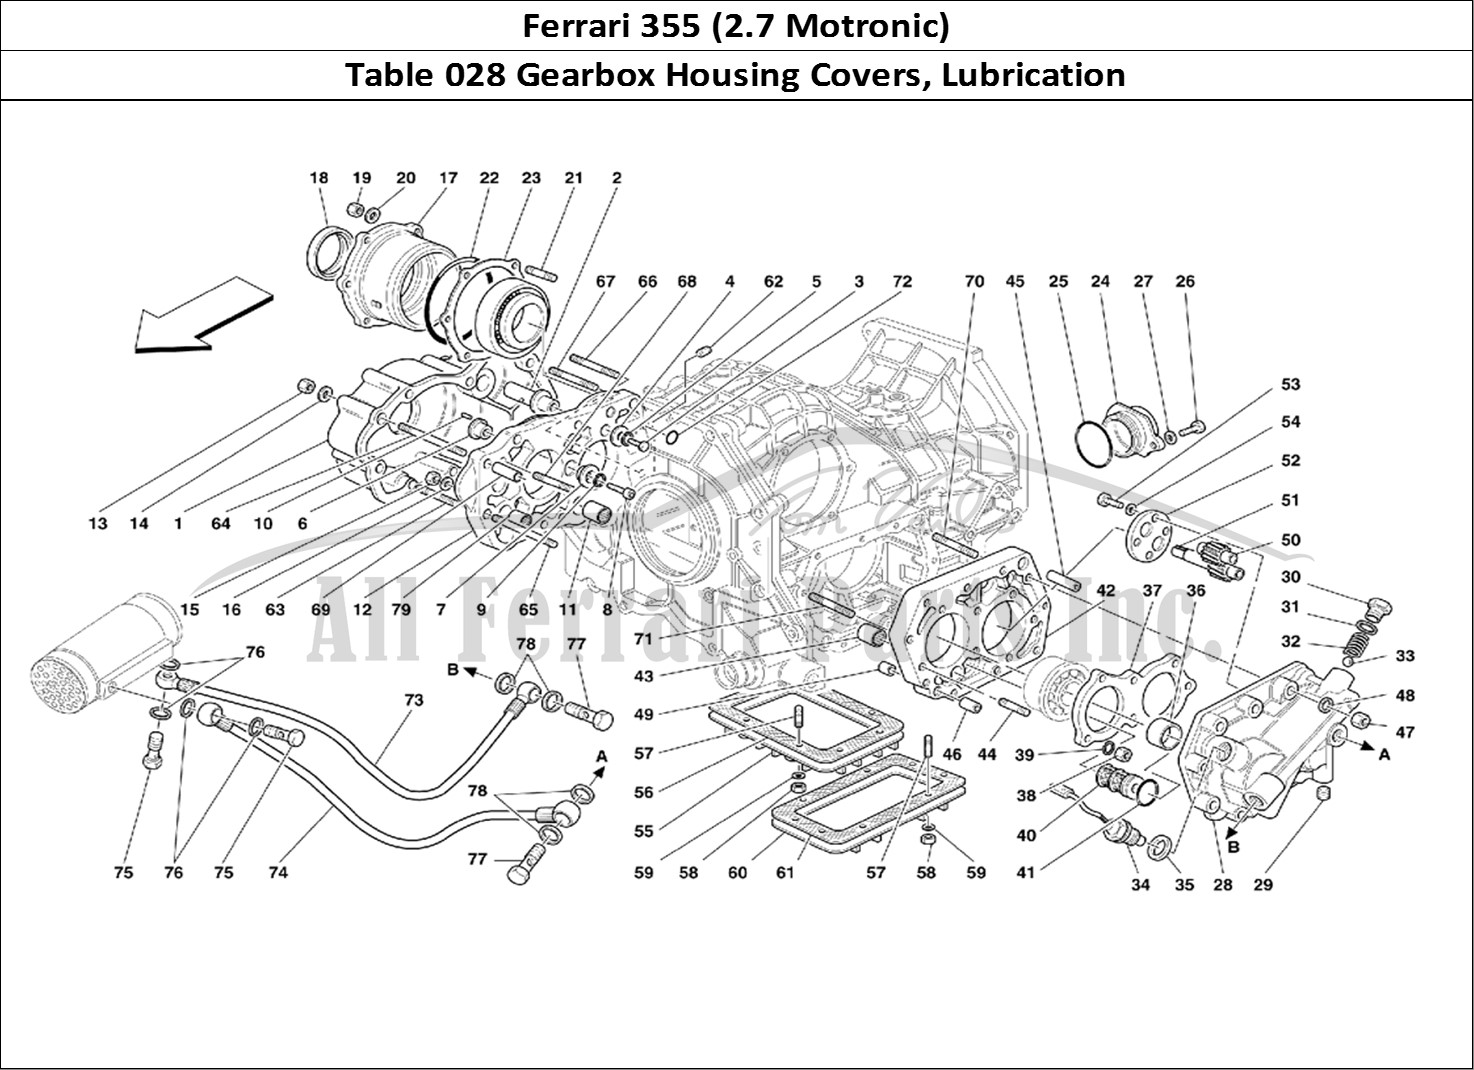 Ferrari Parts Ferrari 355 (2.7 Motronic) Page 028 Gearbox Covers and Lubric